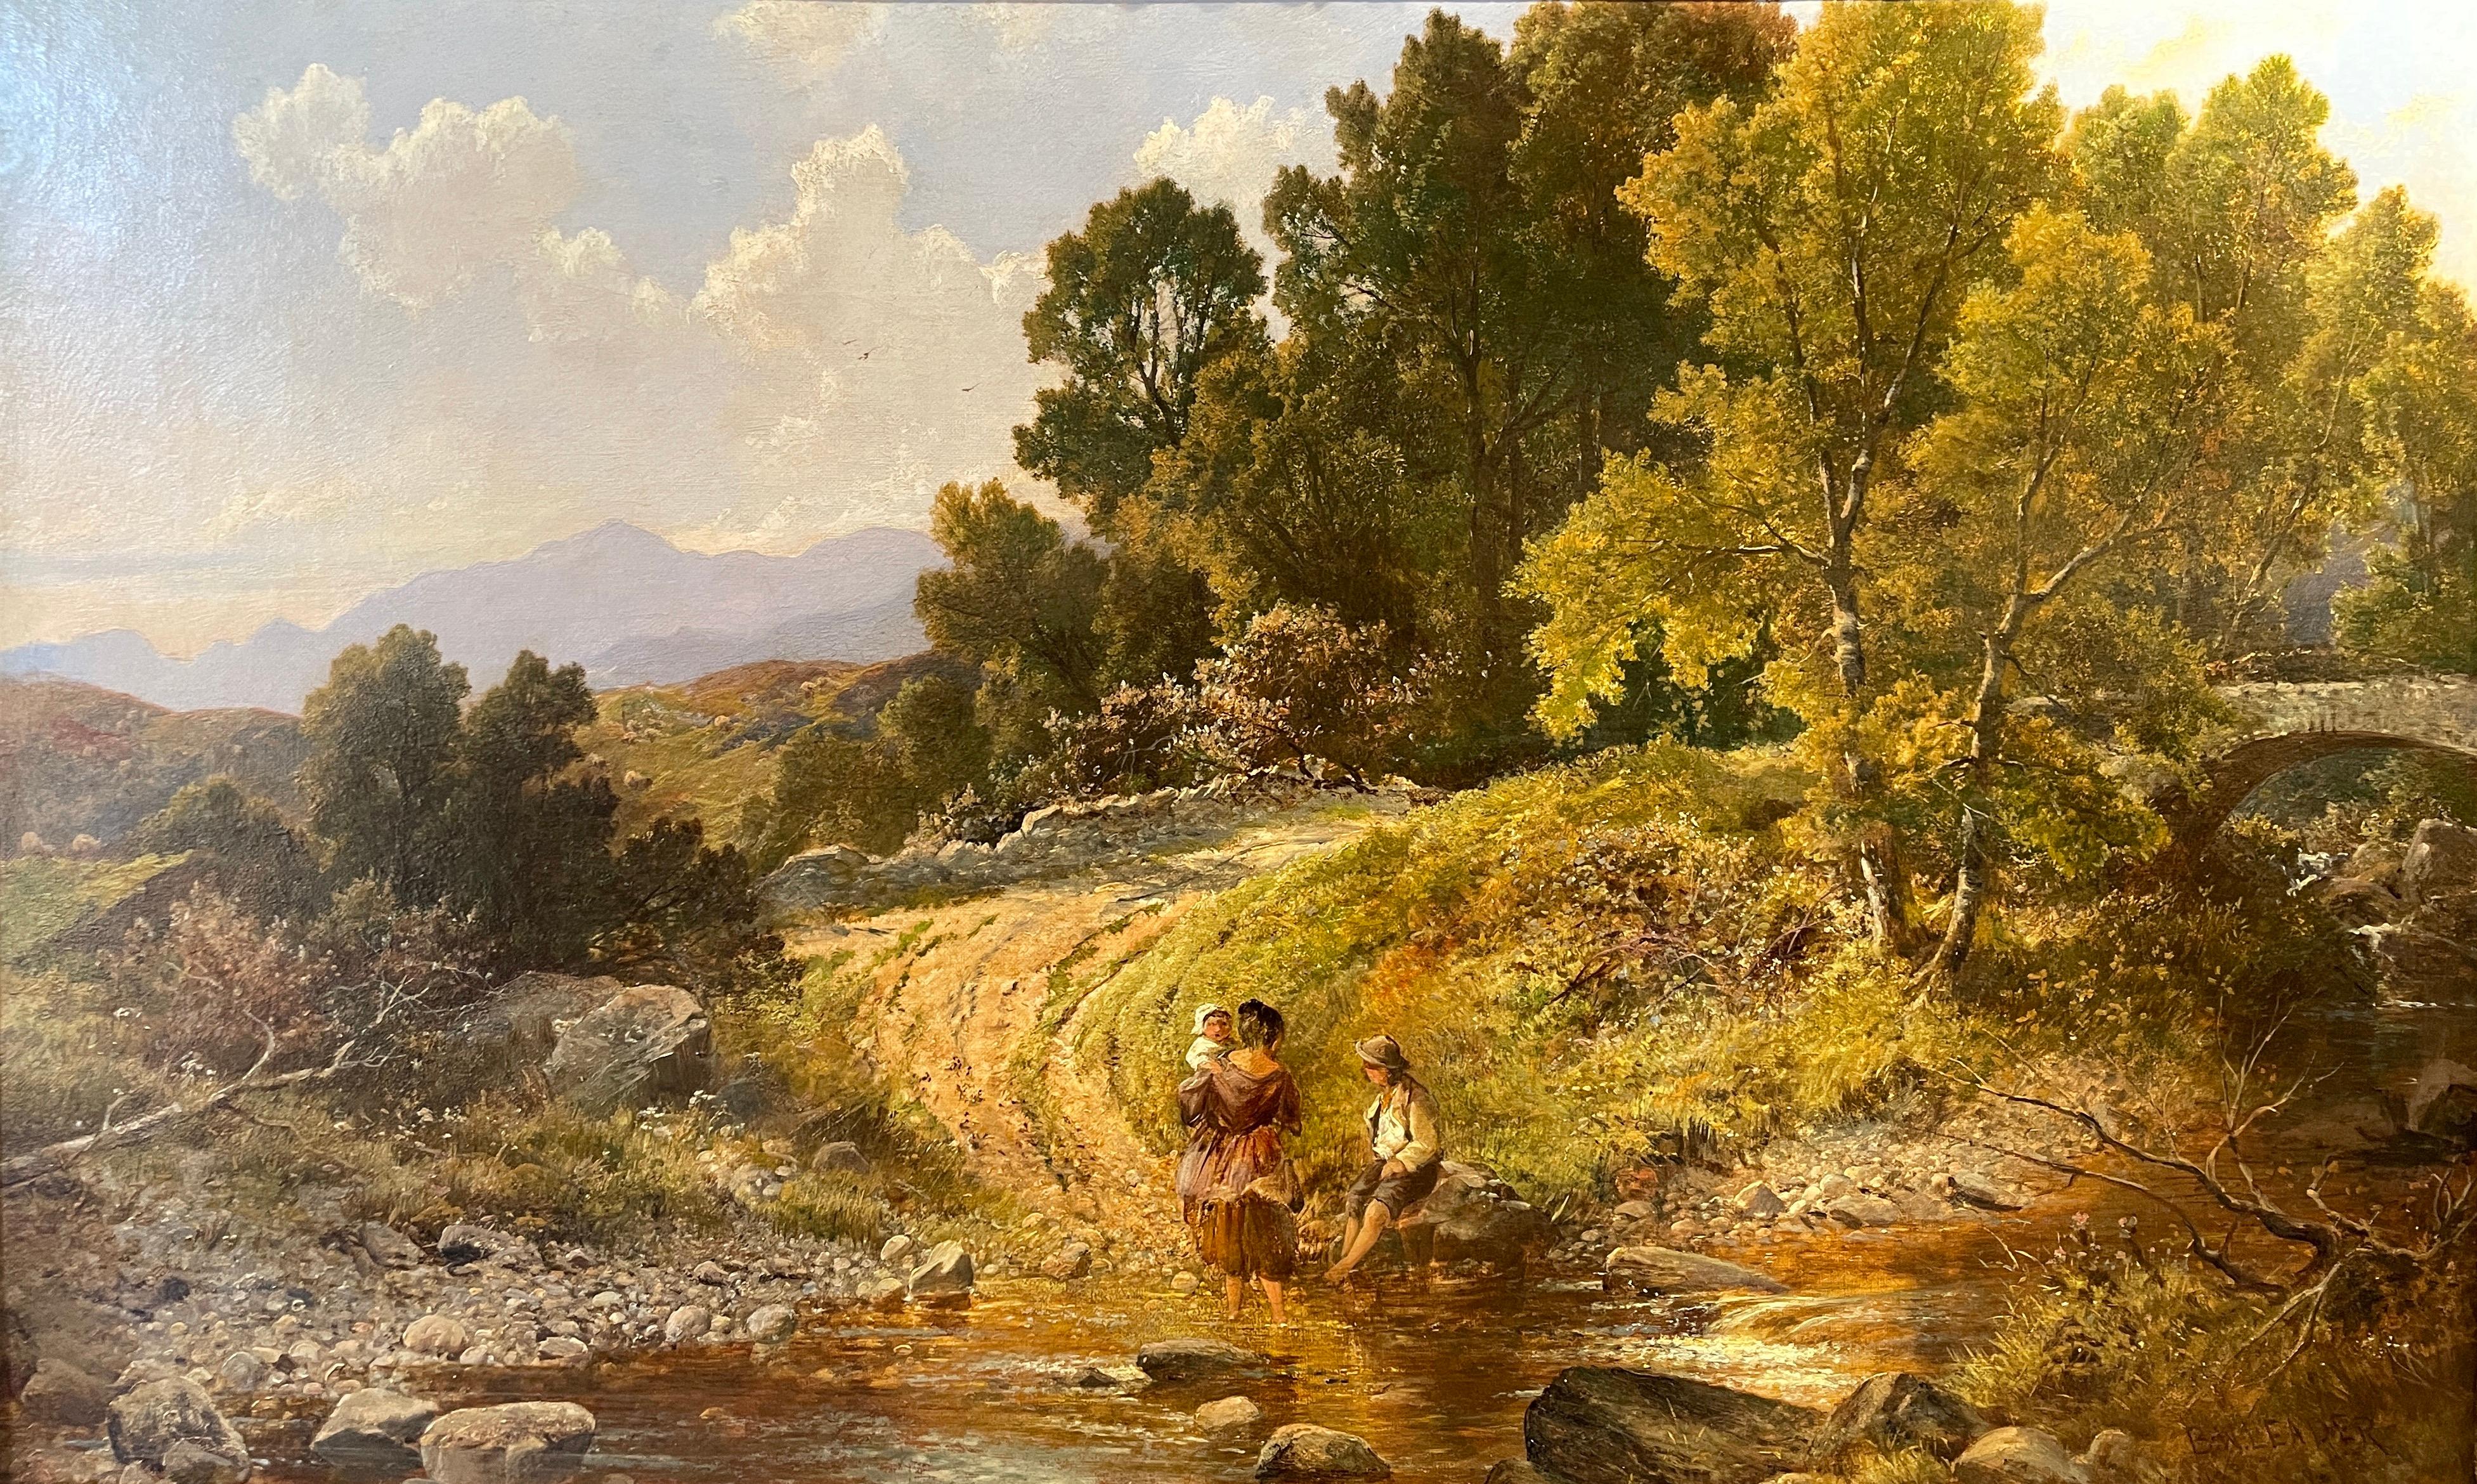 'Wading in the River' 19th century landscape painting of figures, greenery For Sale 1